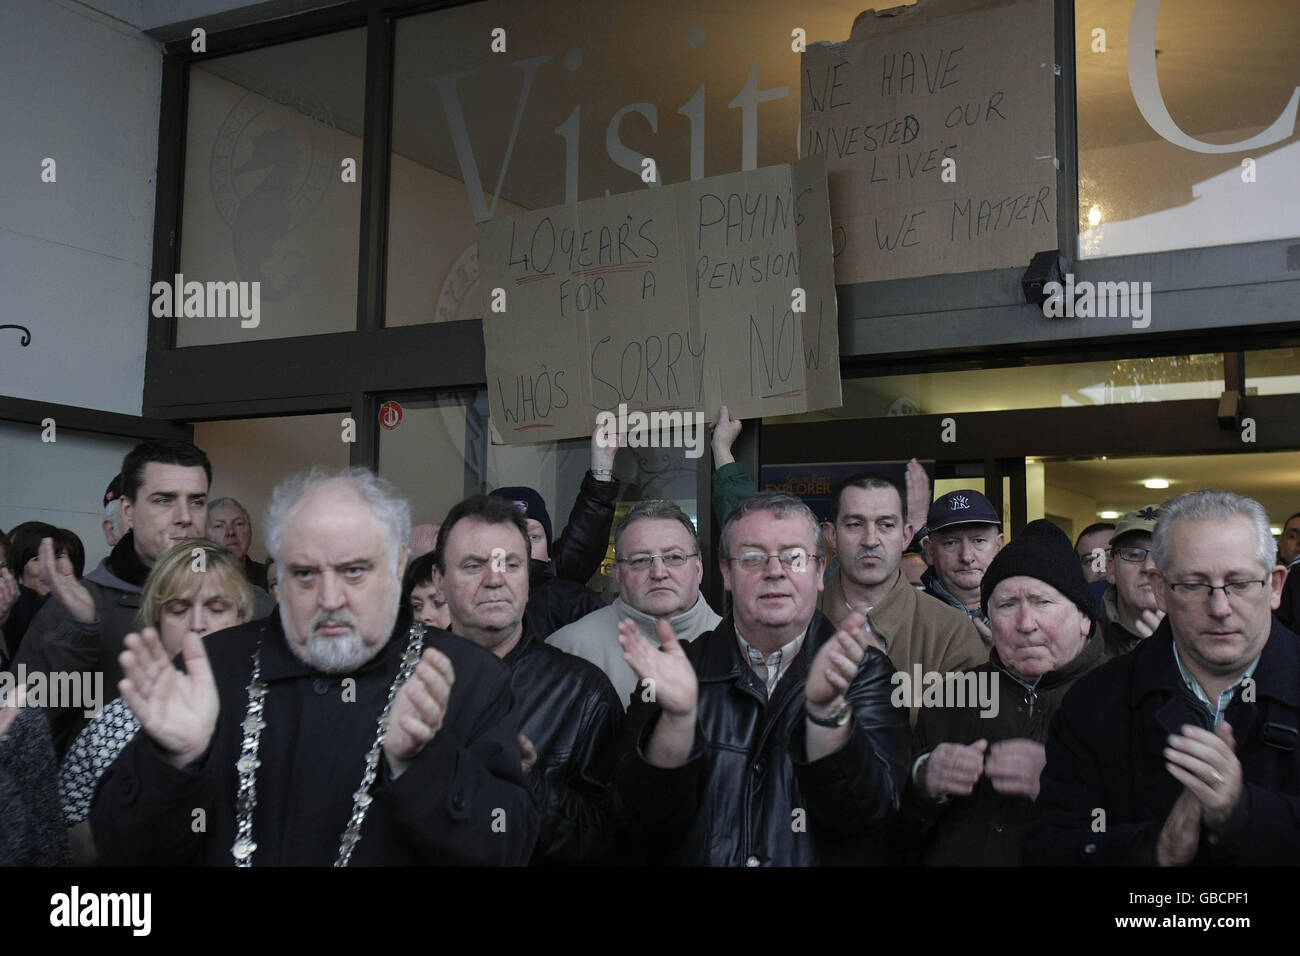 Workers and former employees at Waterford Crystal, who spent the night occupying the main visitor centre at the company's factory in Kilbarry, Waterford. Stock Photo